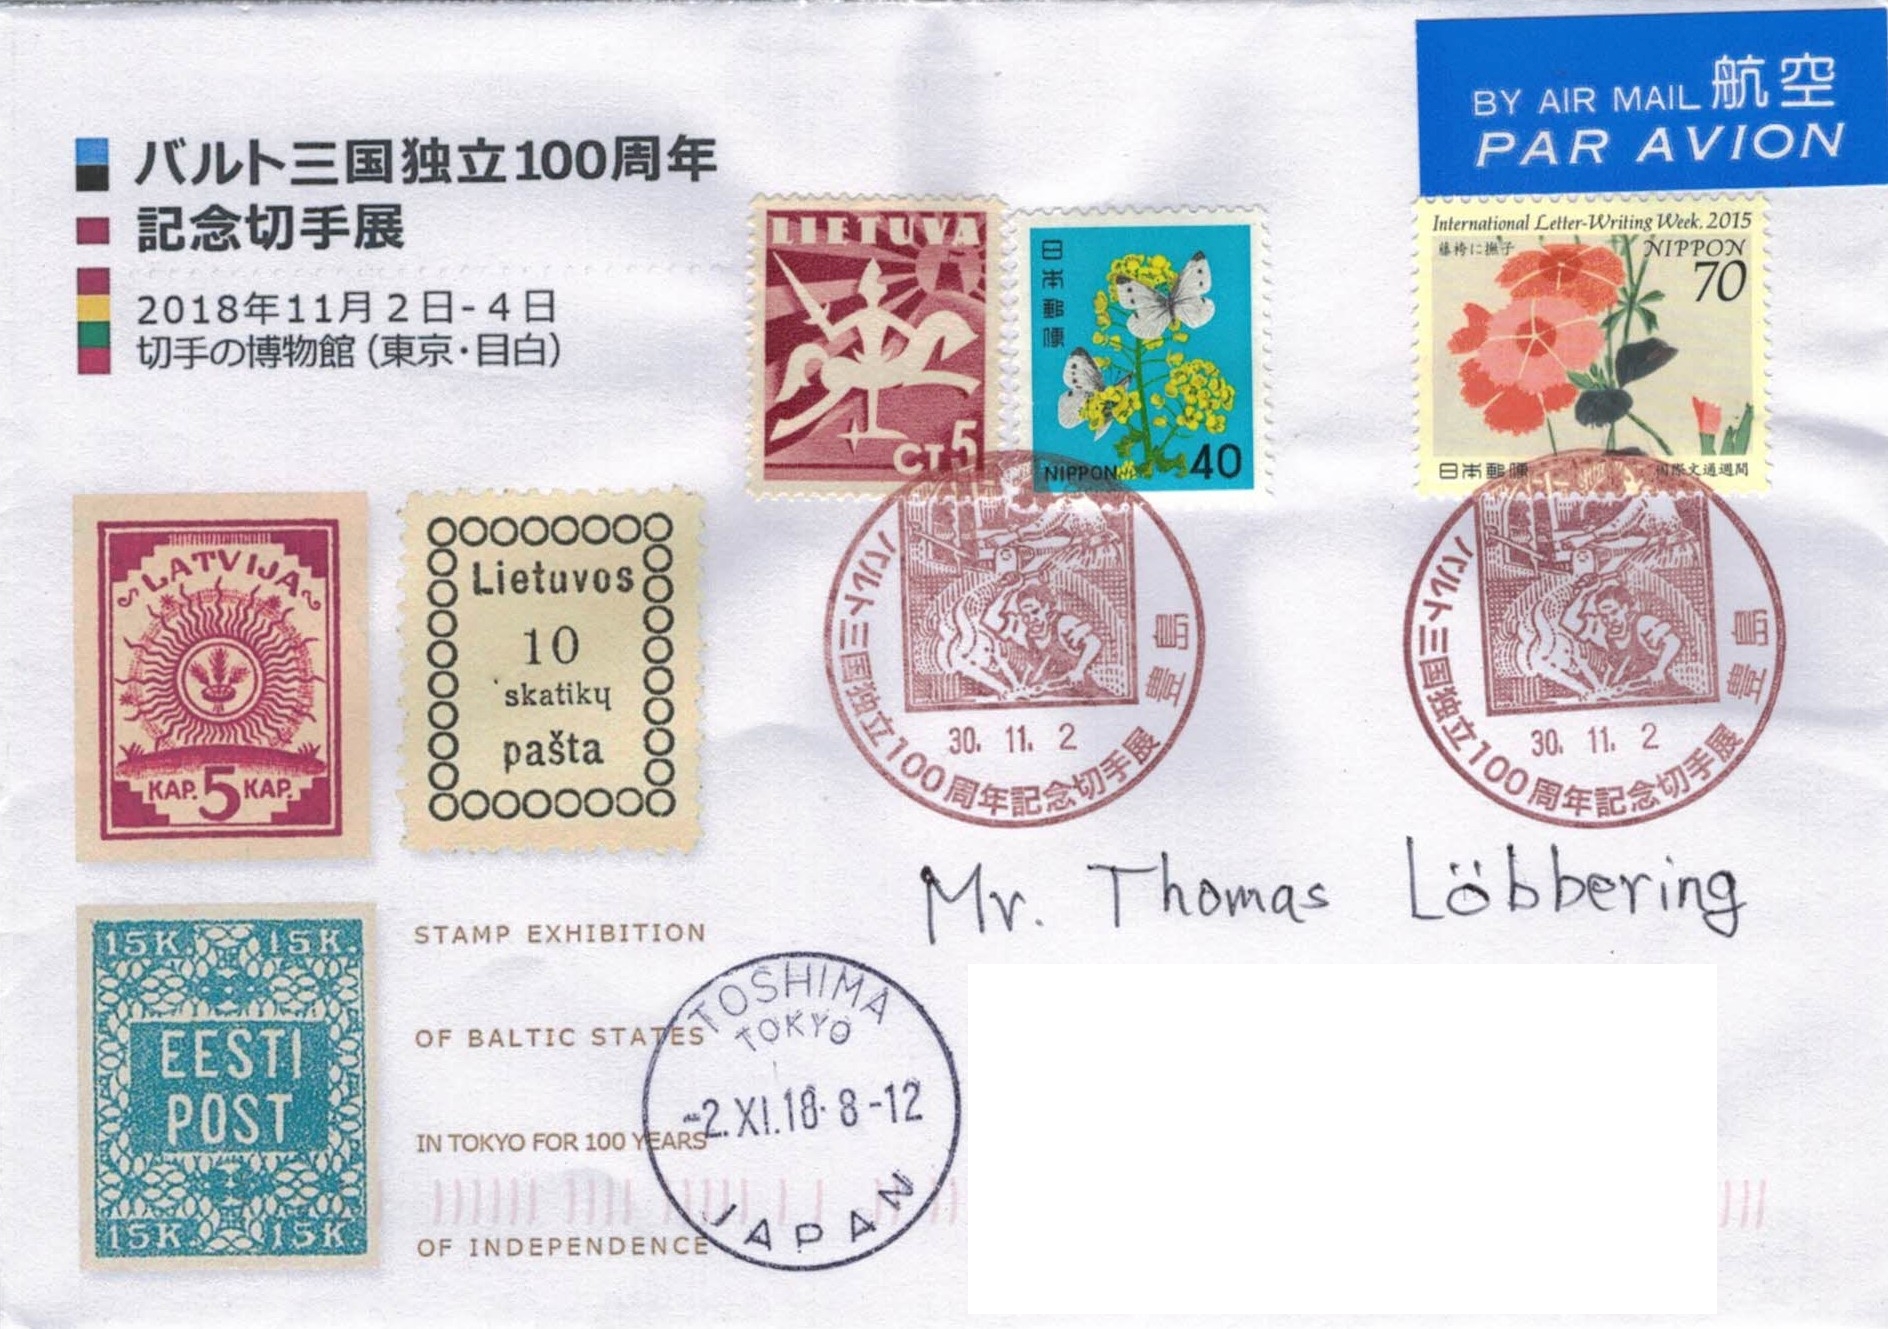 Stamp exhibition '100 years independence of the Baltic States' in Tokyo - Cover 2